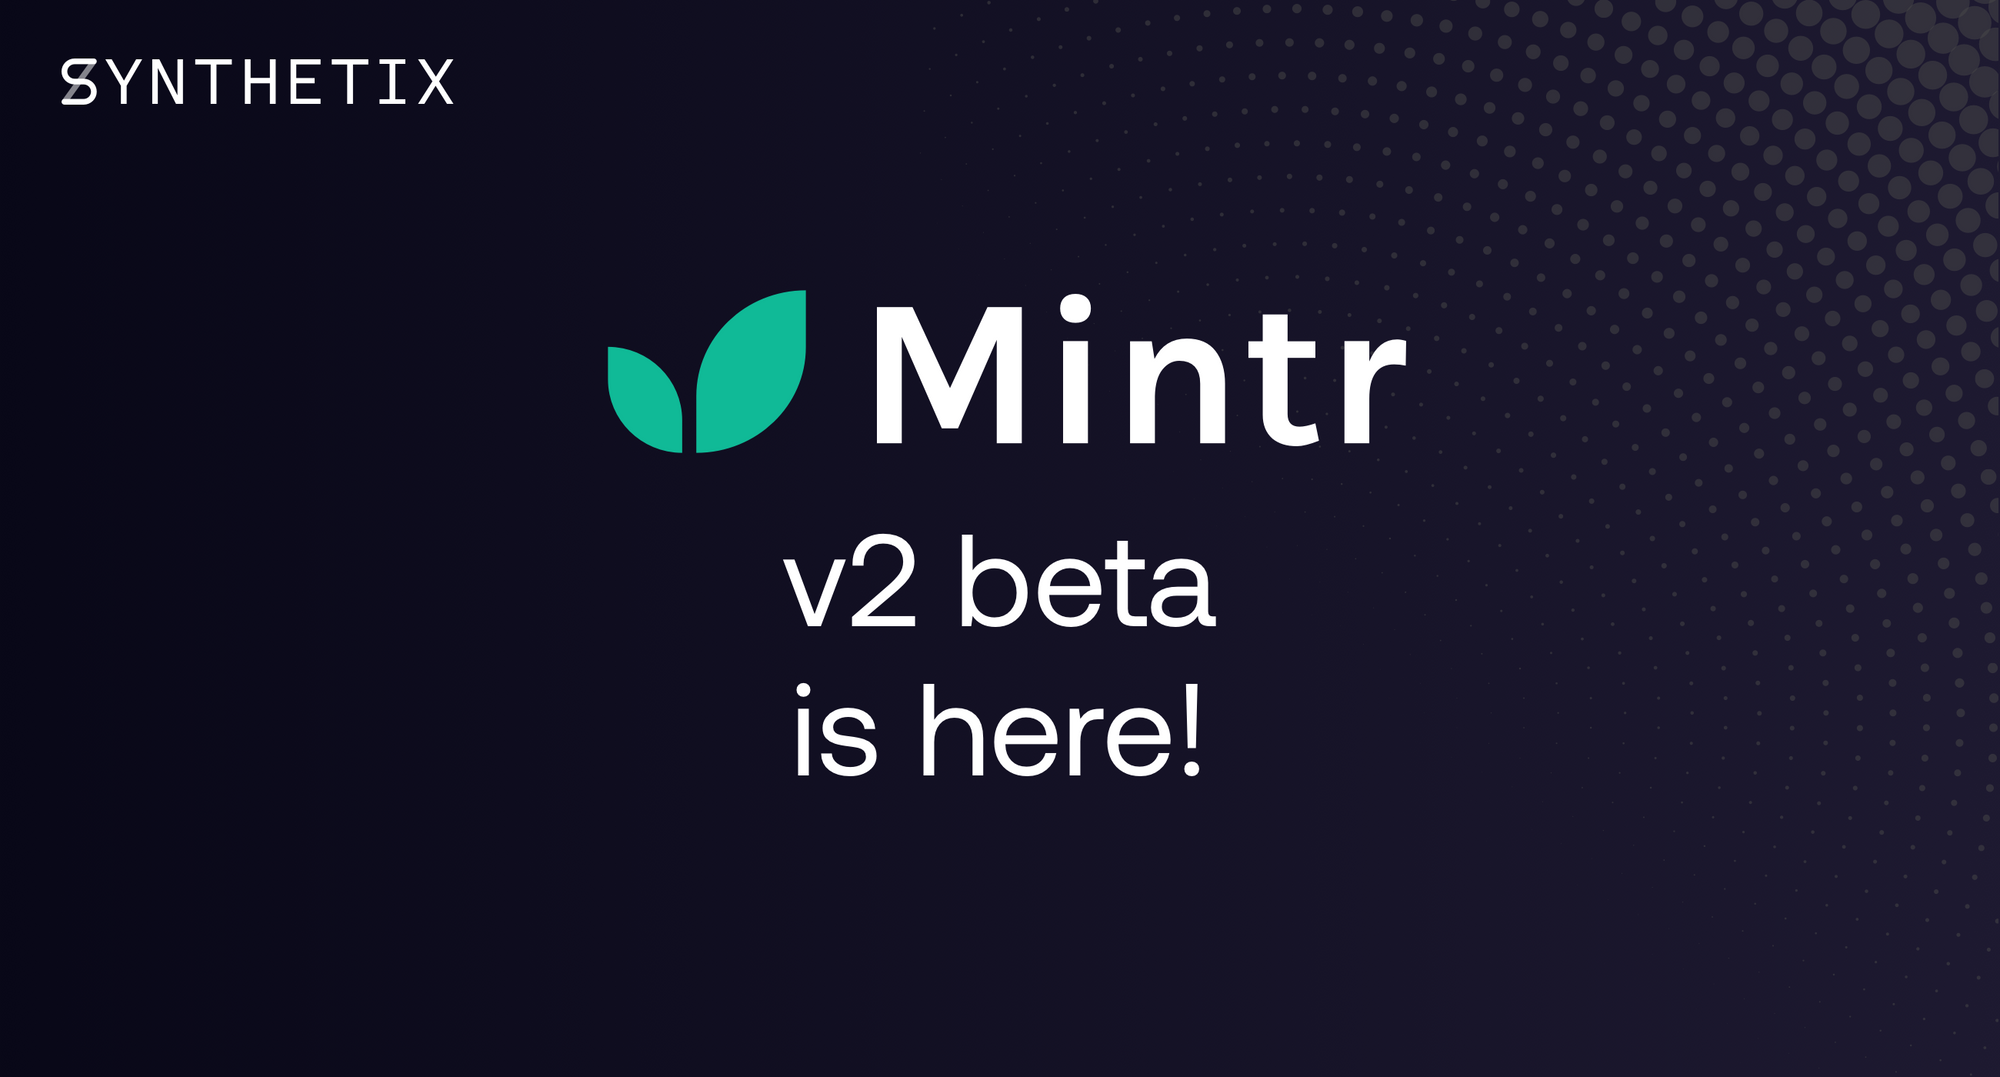 The Mintr v2 beta is now live!